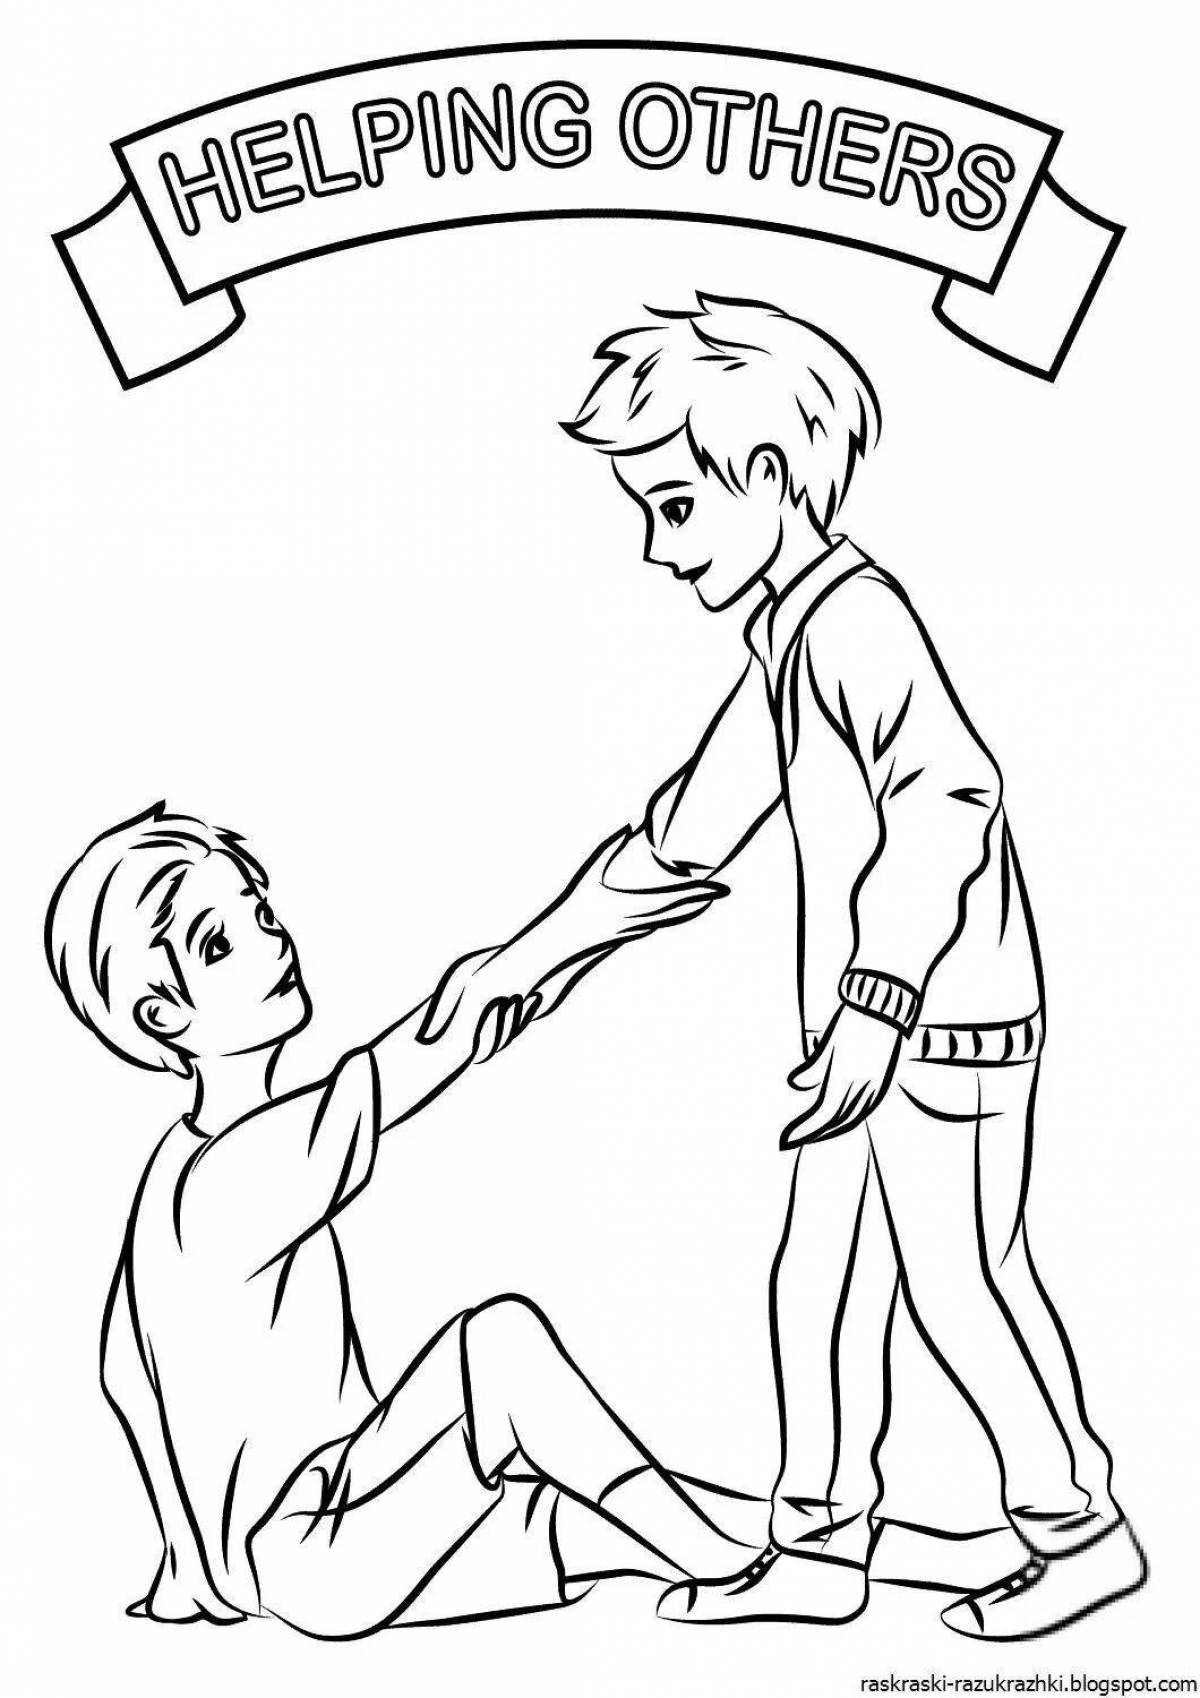 Great good deeds coloring page